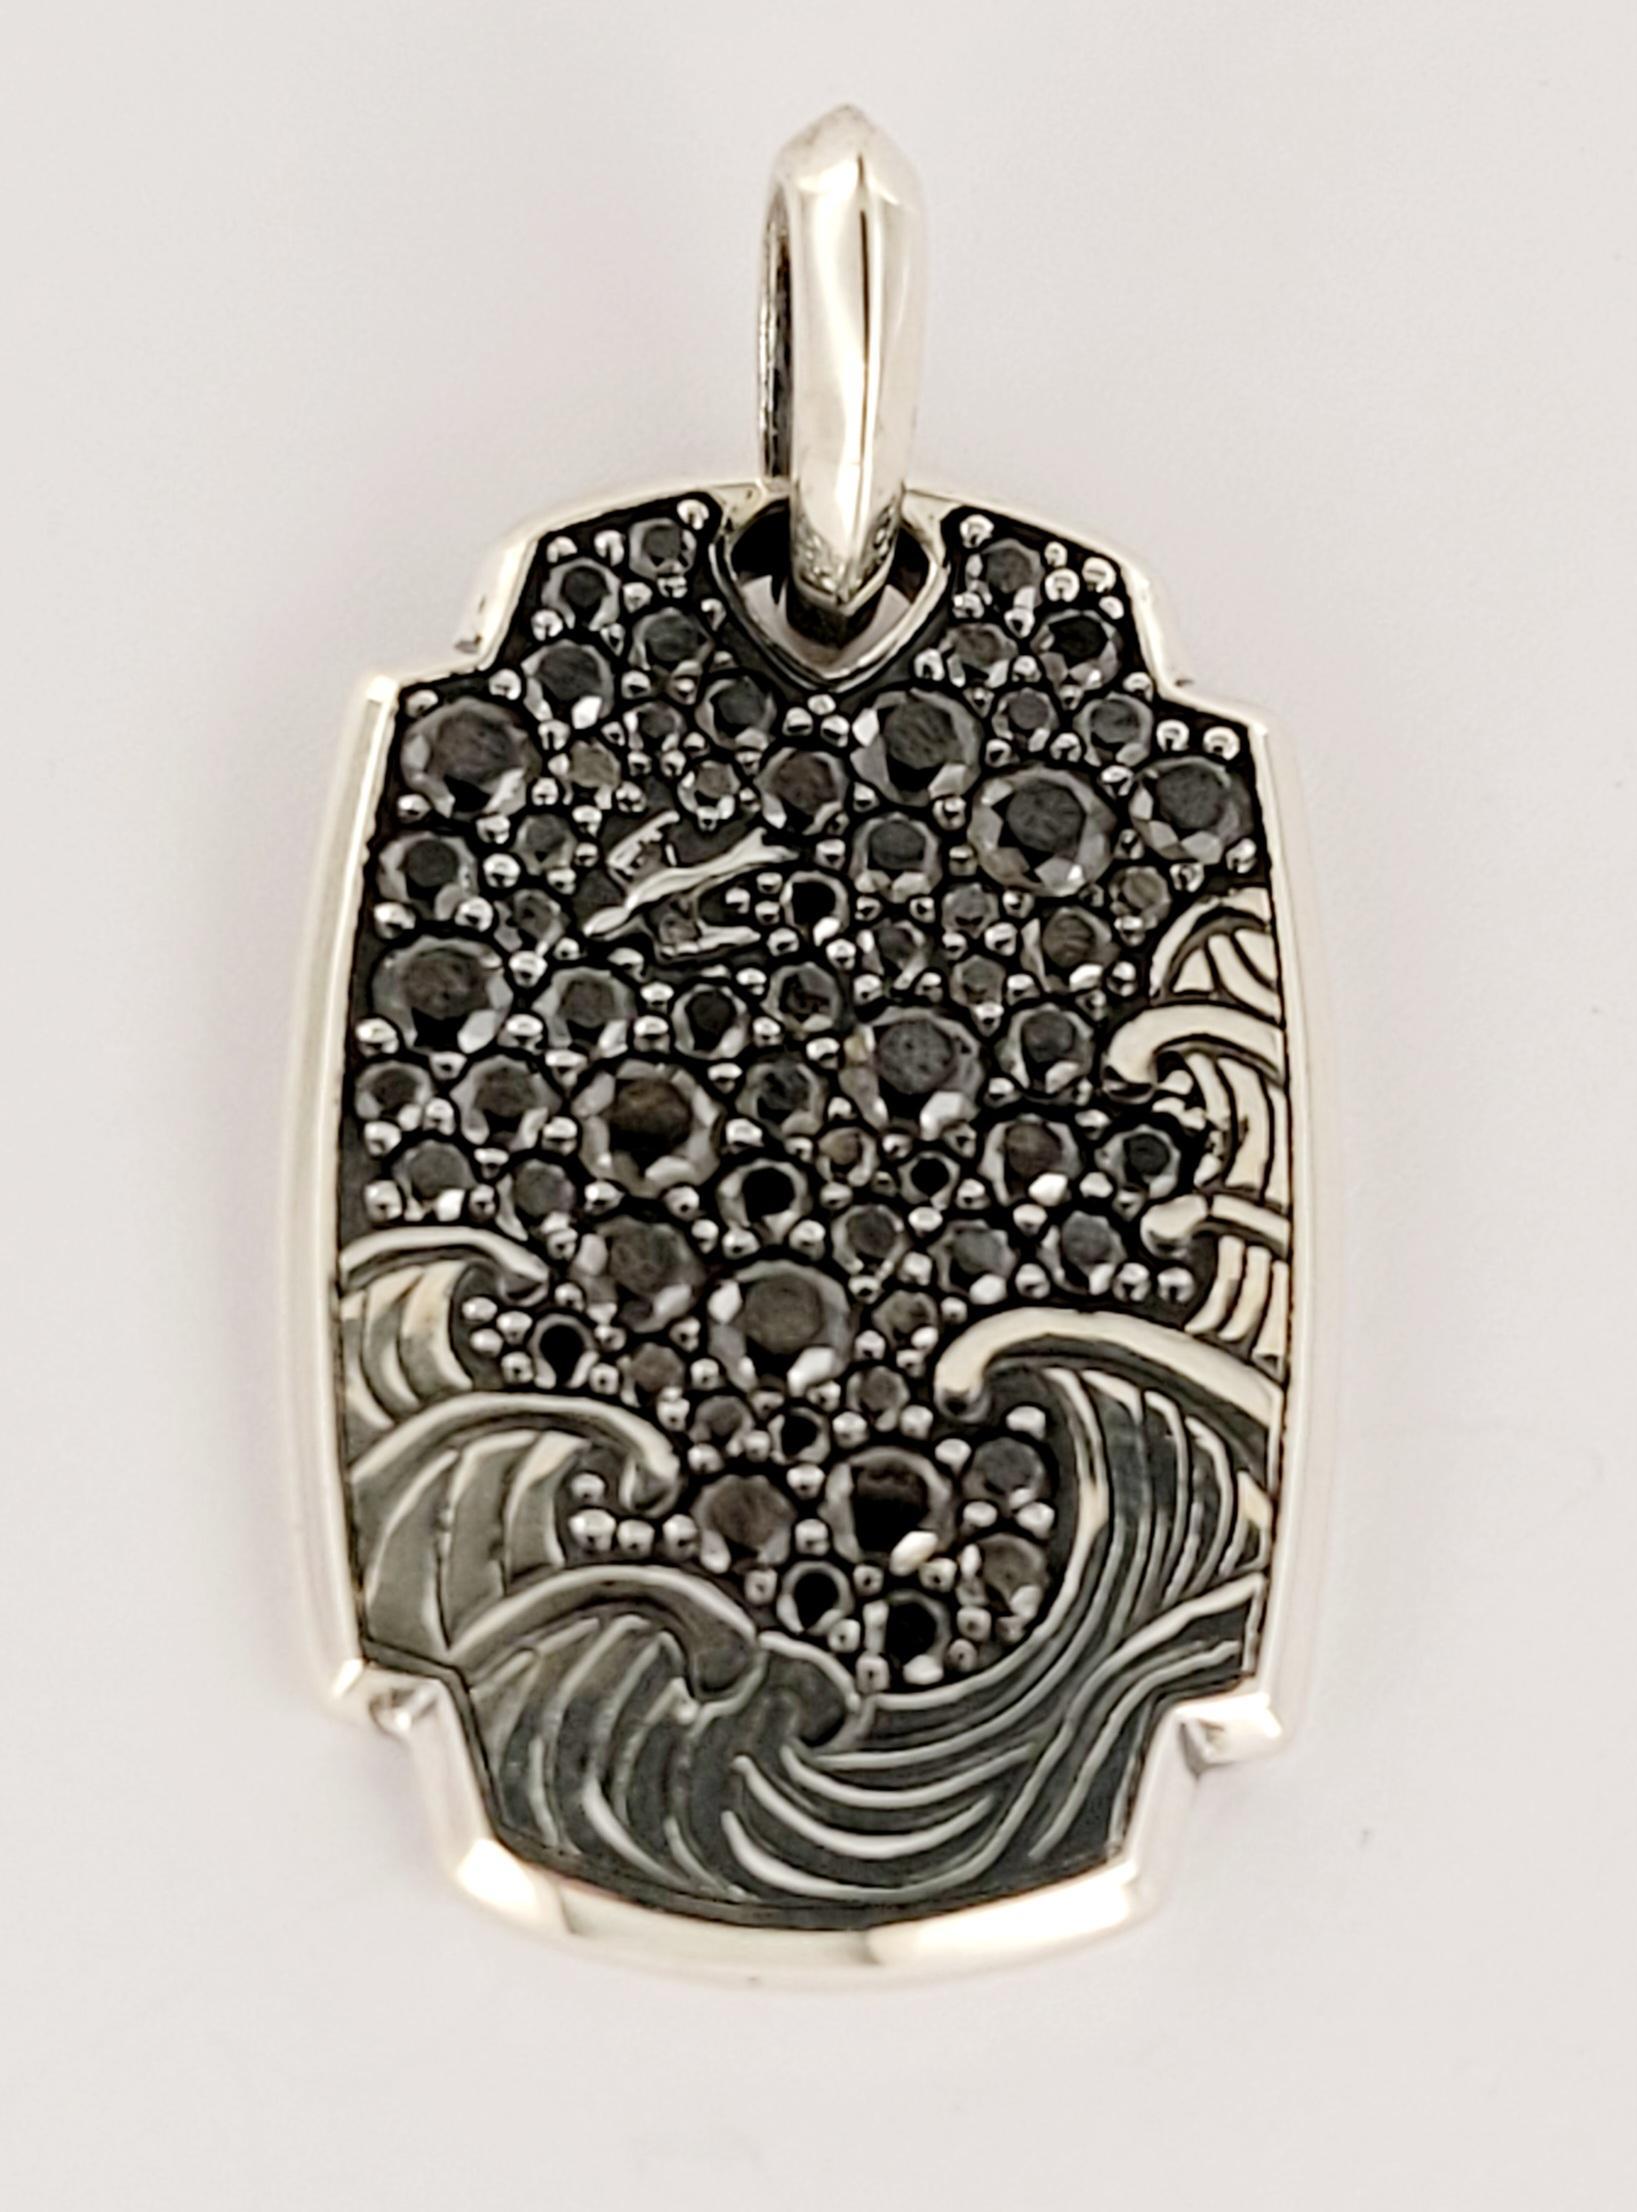 Brand David Yurman 
Waves diamond amulet tag enhancer
Pave Set 1.84ct black diamonds  
Material Sterling Silver 925
Dimension 30.7 X 20mm
With Bail 37.3mm
Weight 11gr 
Condition New, never worn
Comes with David Yurman Pouch
Retail Price$2.765


    